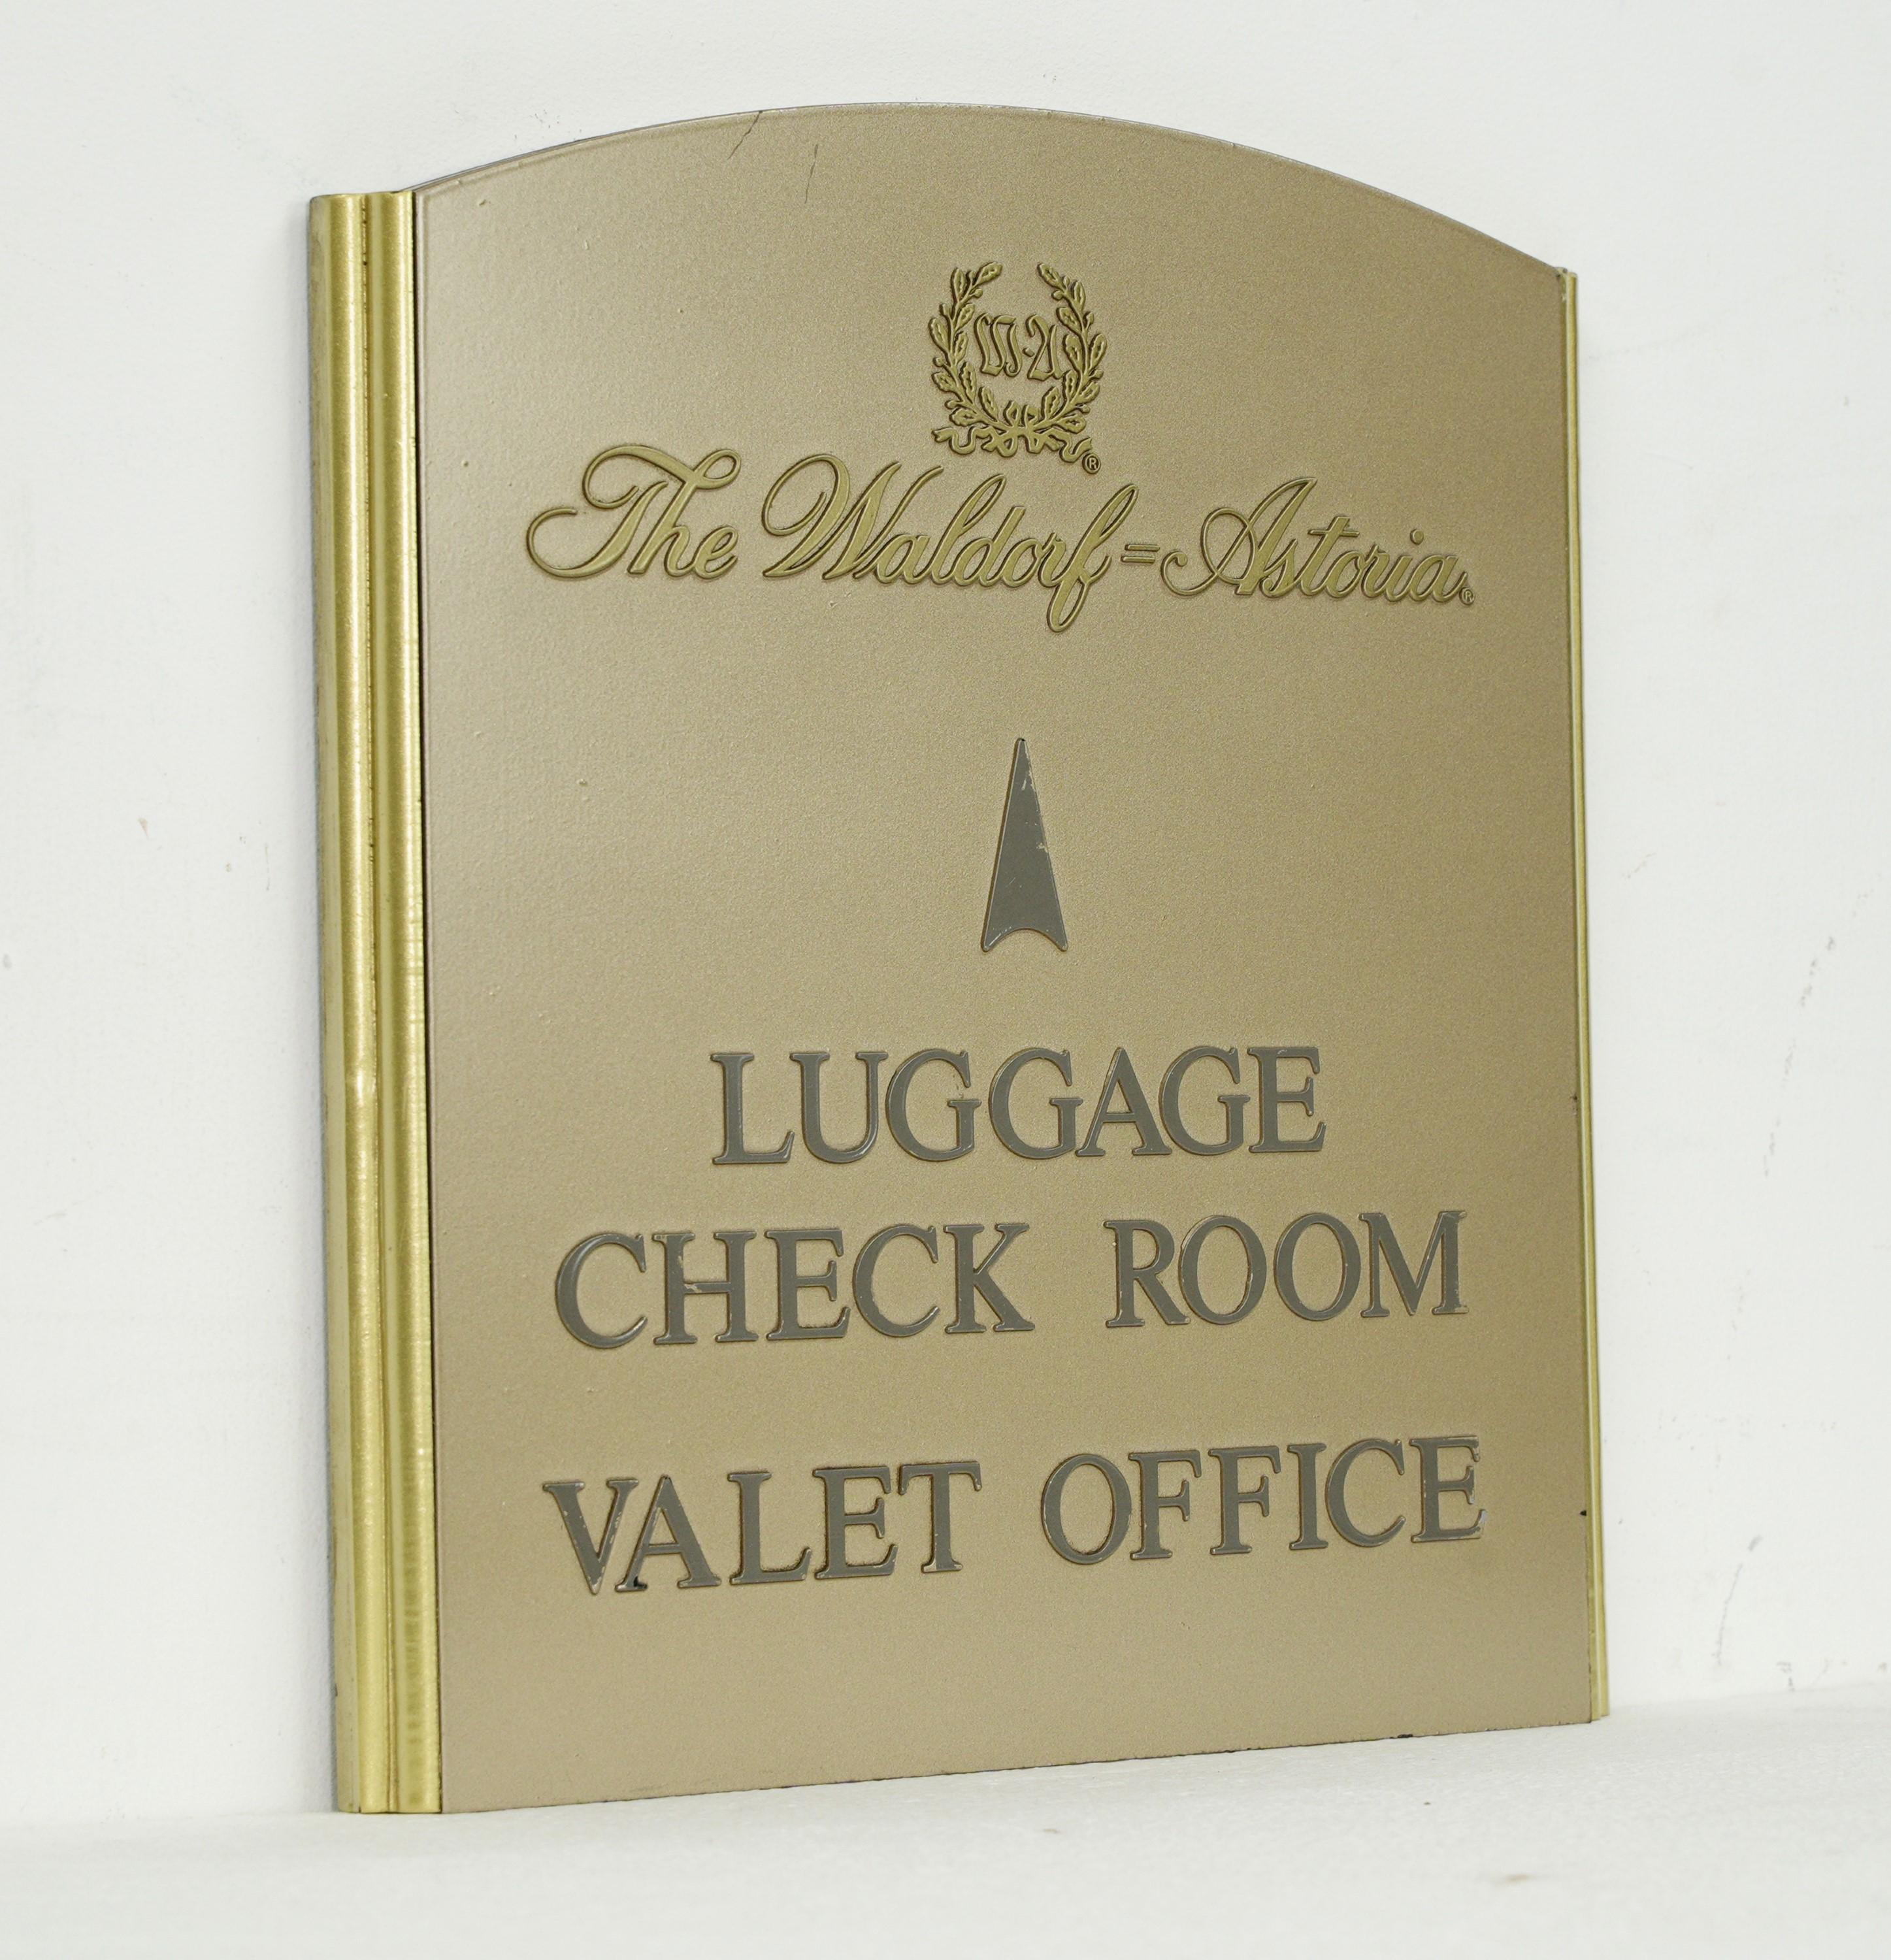 Waldorf Astoria Hotel Check Room Valet Office Sign In Good Condition In New York, NY